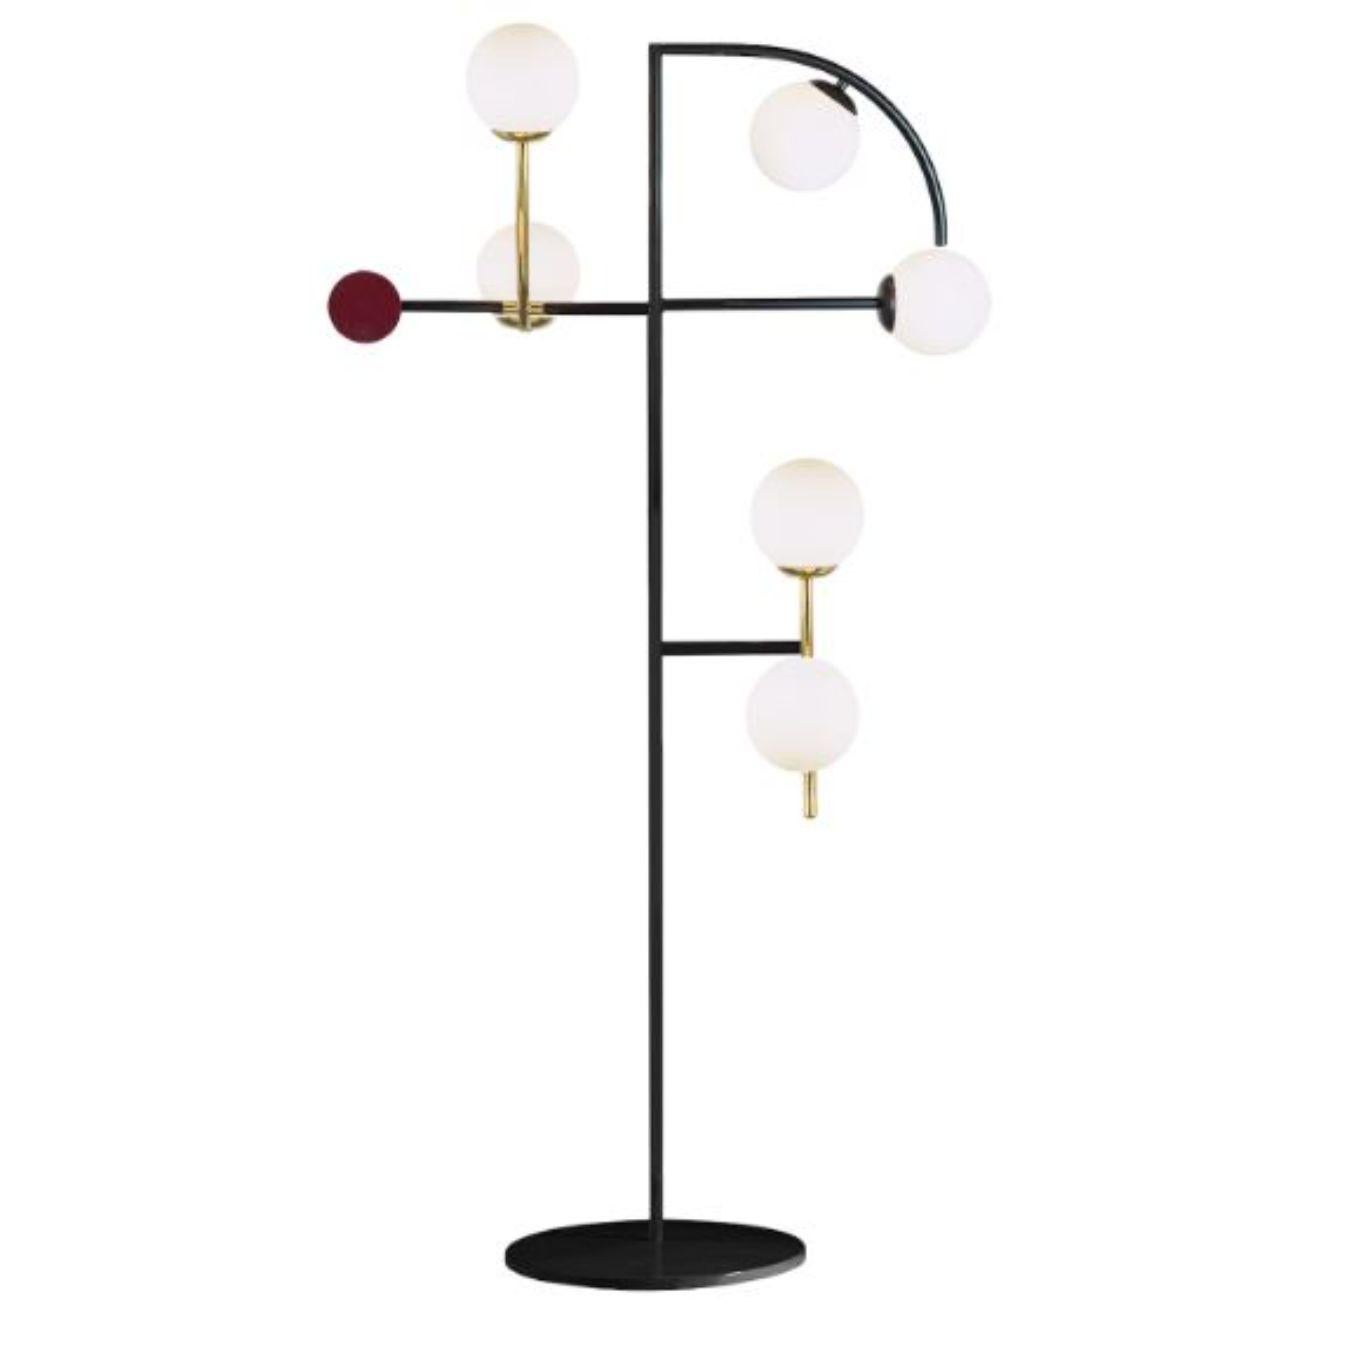 Black Helio floor lamp by Dooq
Dimensions: W 95 x D 30 x H 169 cm
Materials: lacquered metal, brass/nickel.
Also available in different colors and materials. 

Information:
230V/50Hz
6 x max. G9
4W LED

120V/60Hz
6 x max. G9
4W